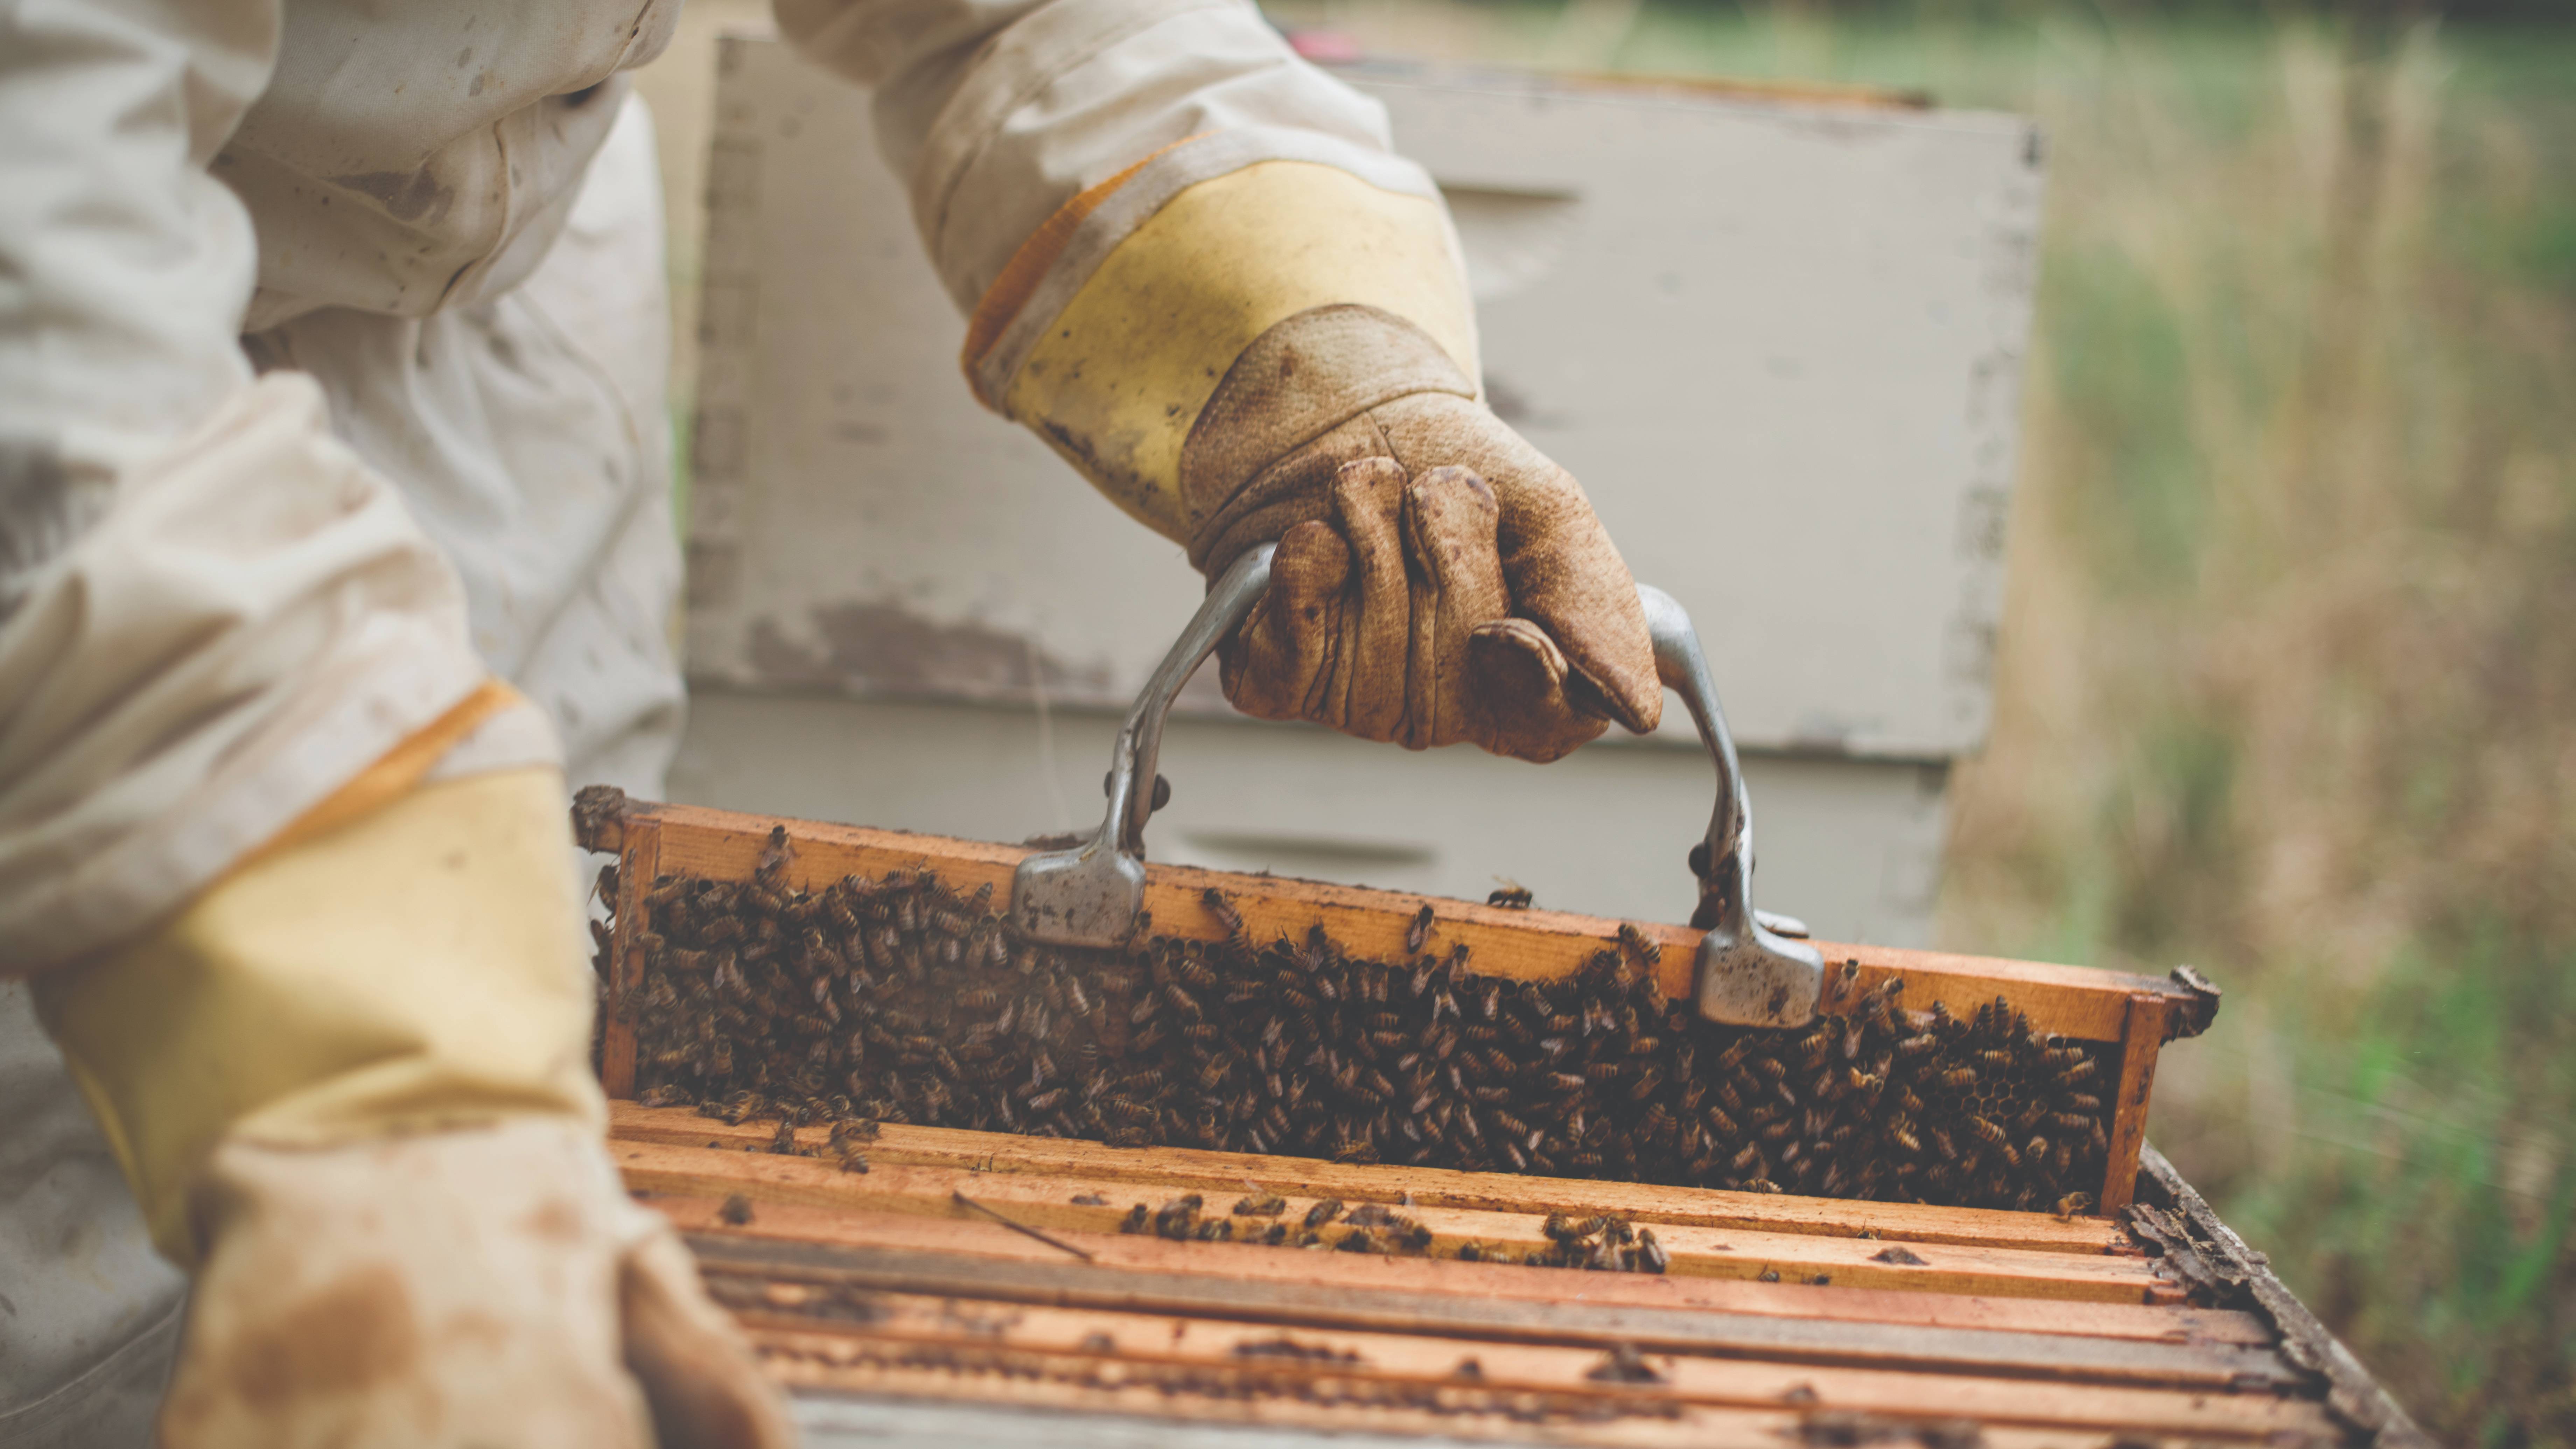 Meaningful work bee hive